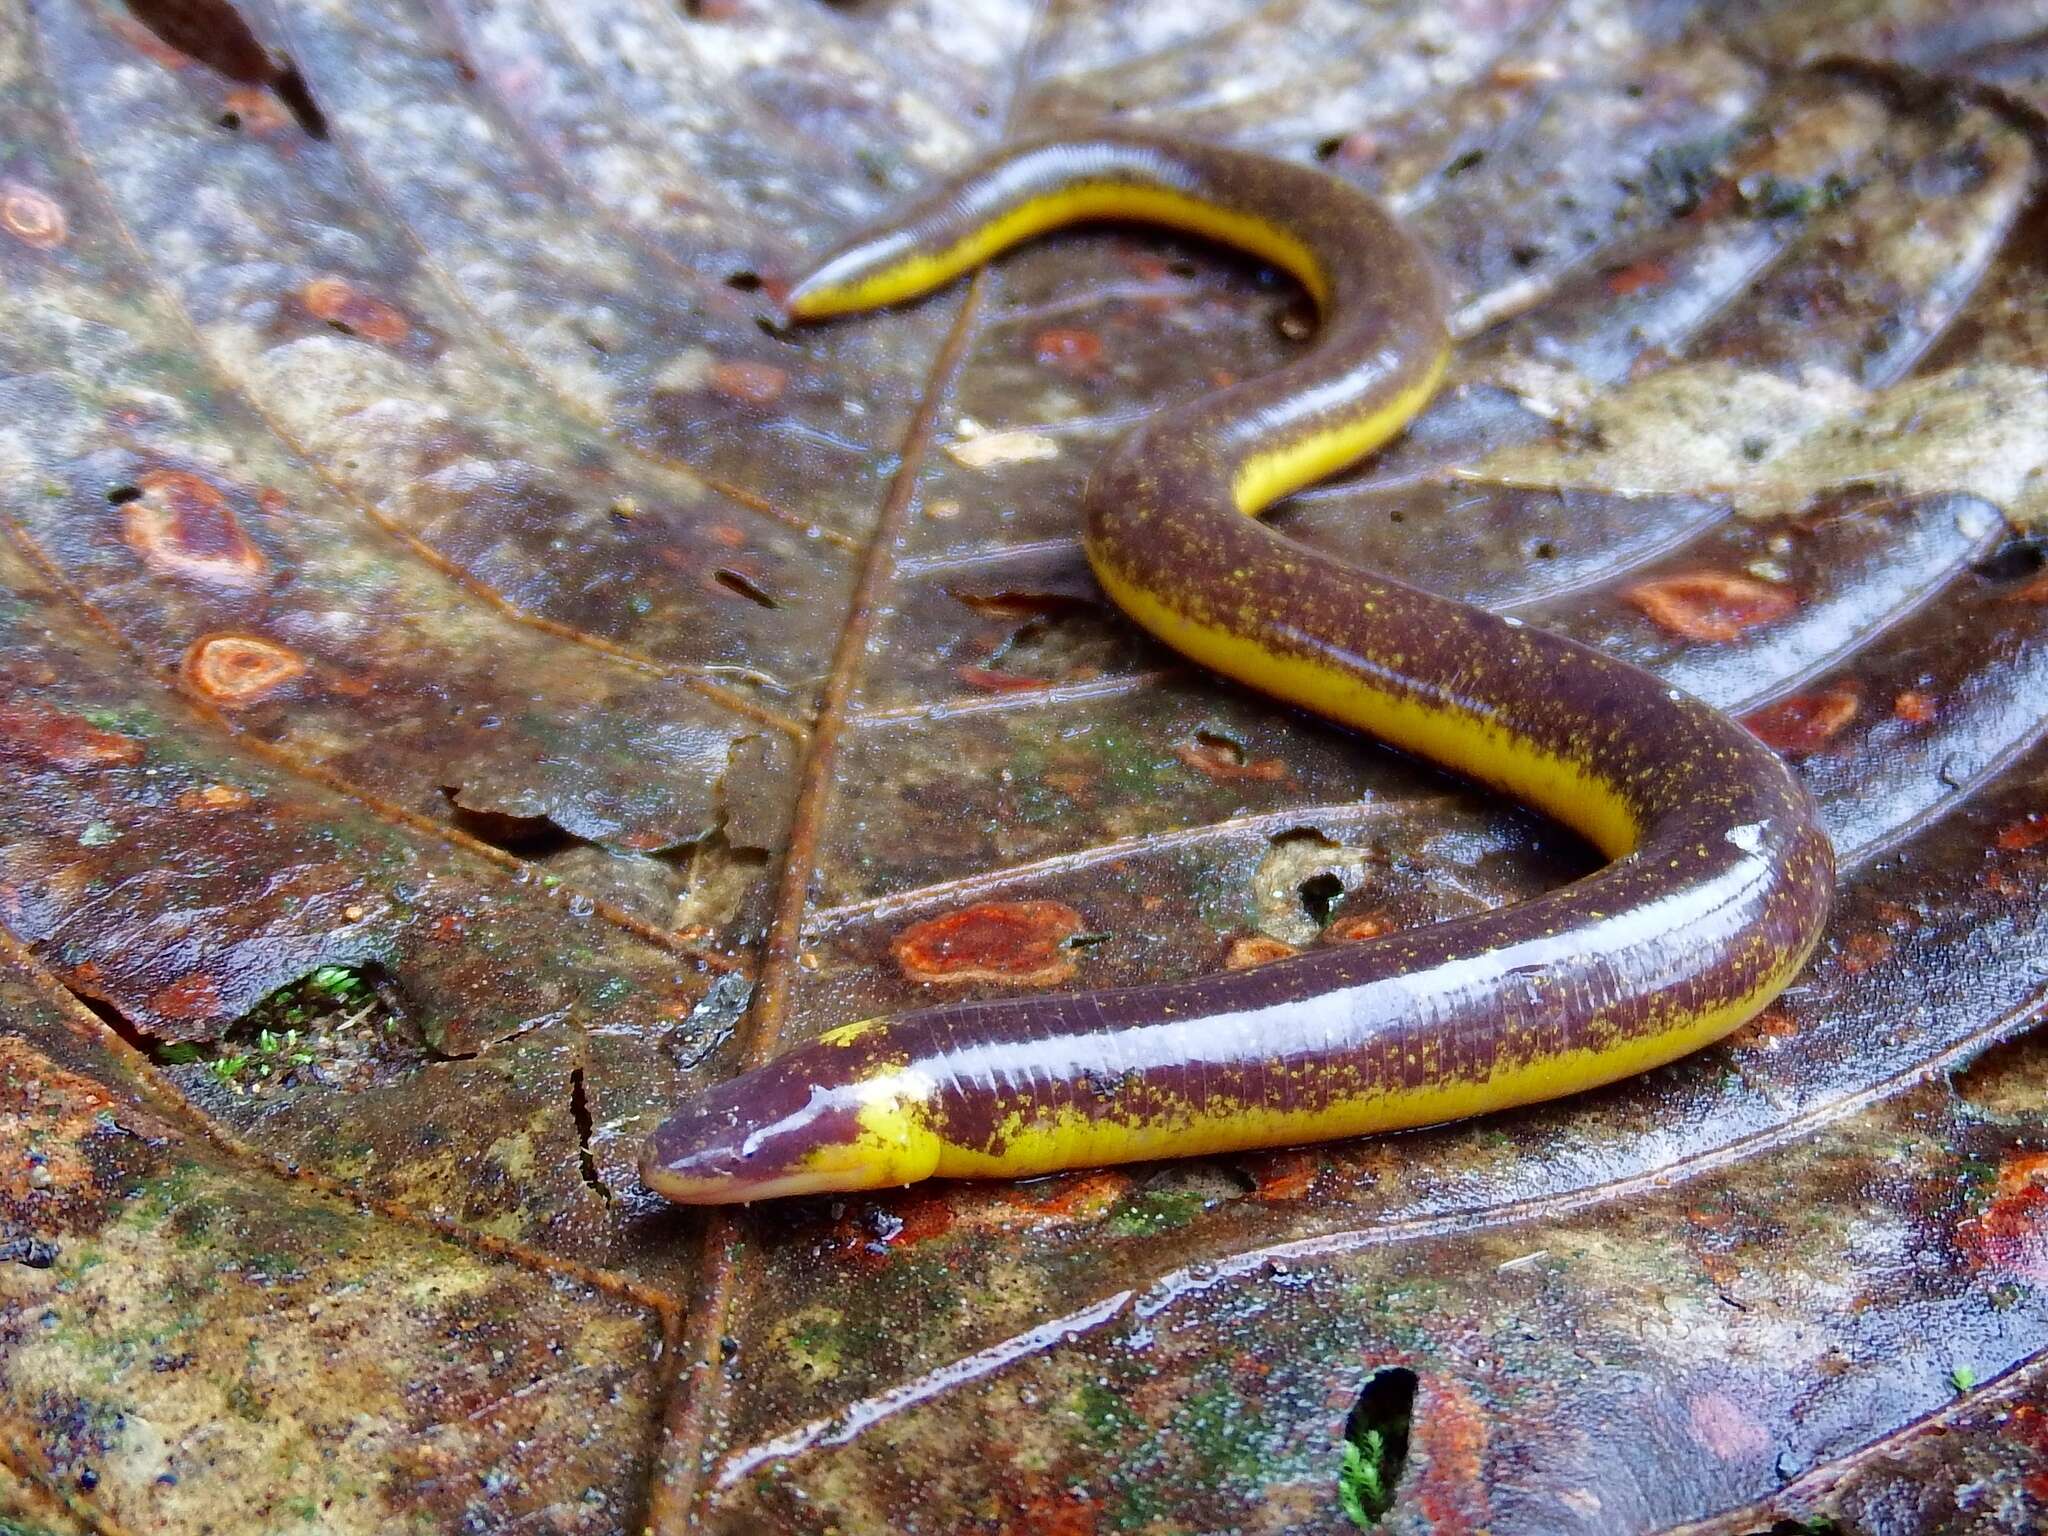 Image of neotropical tailed caecilians